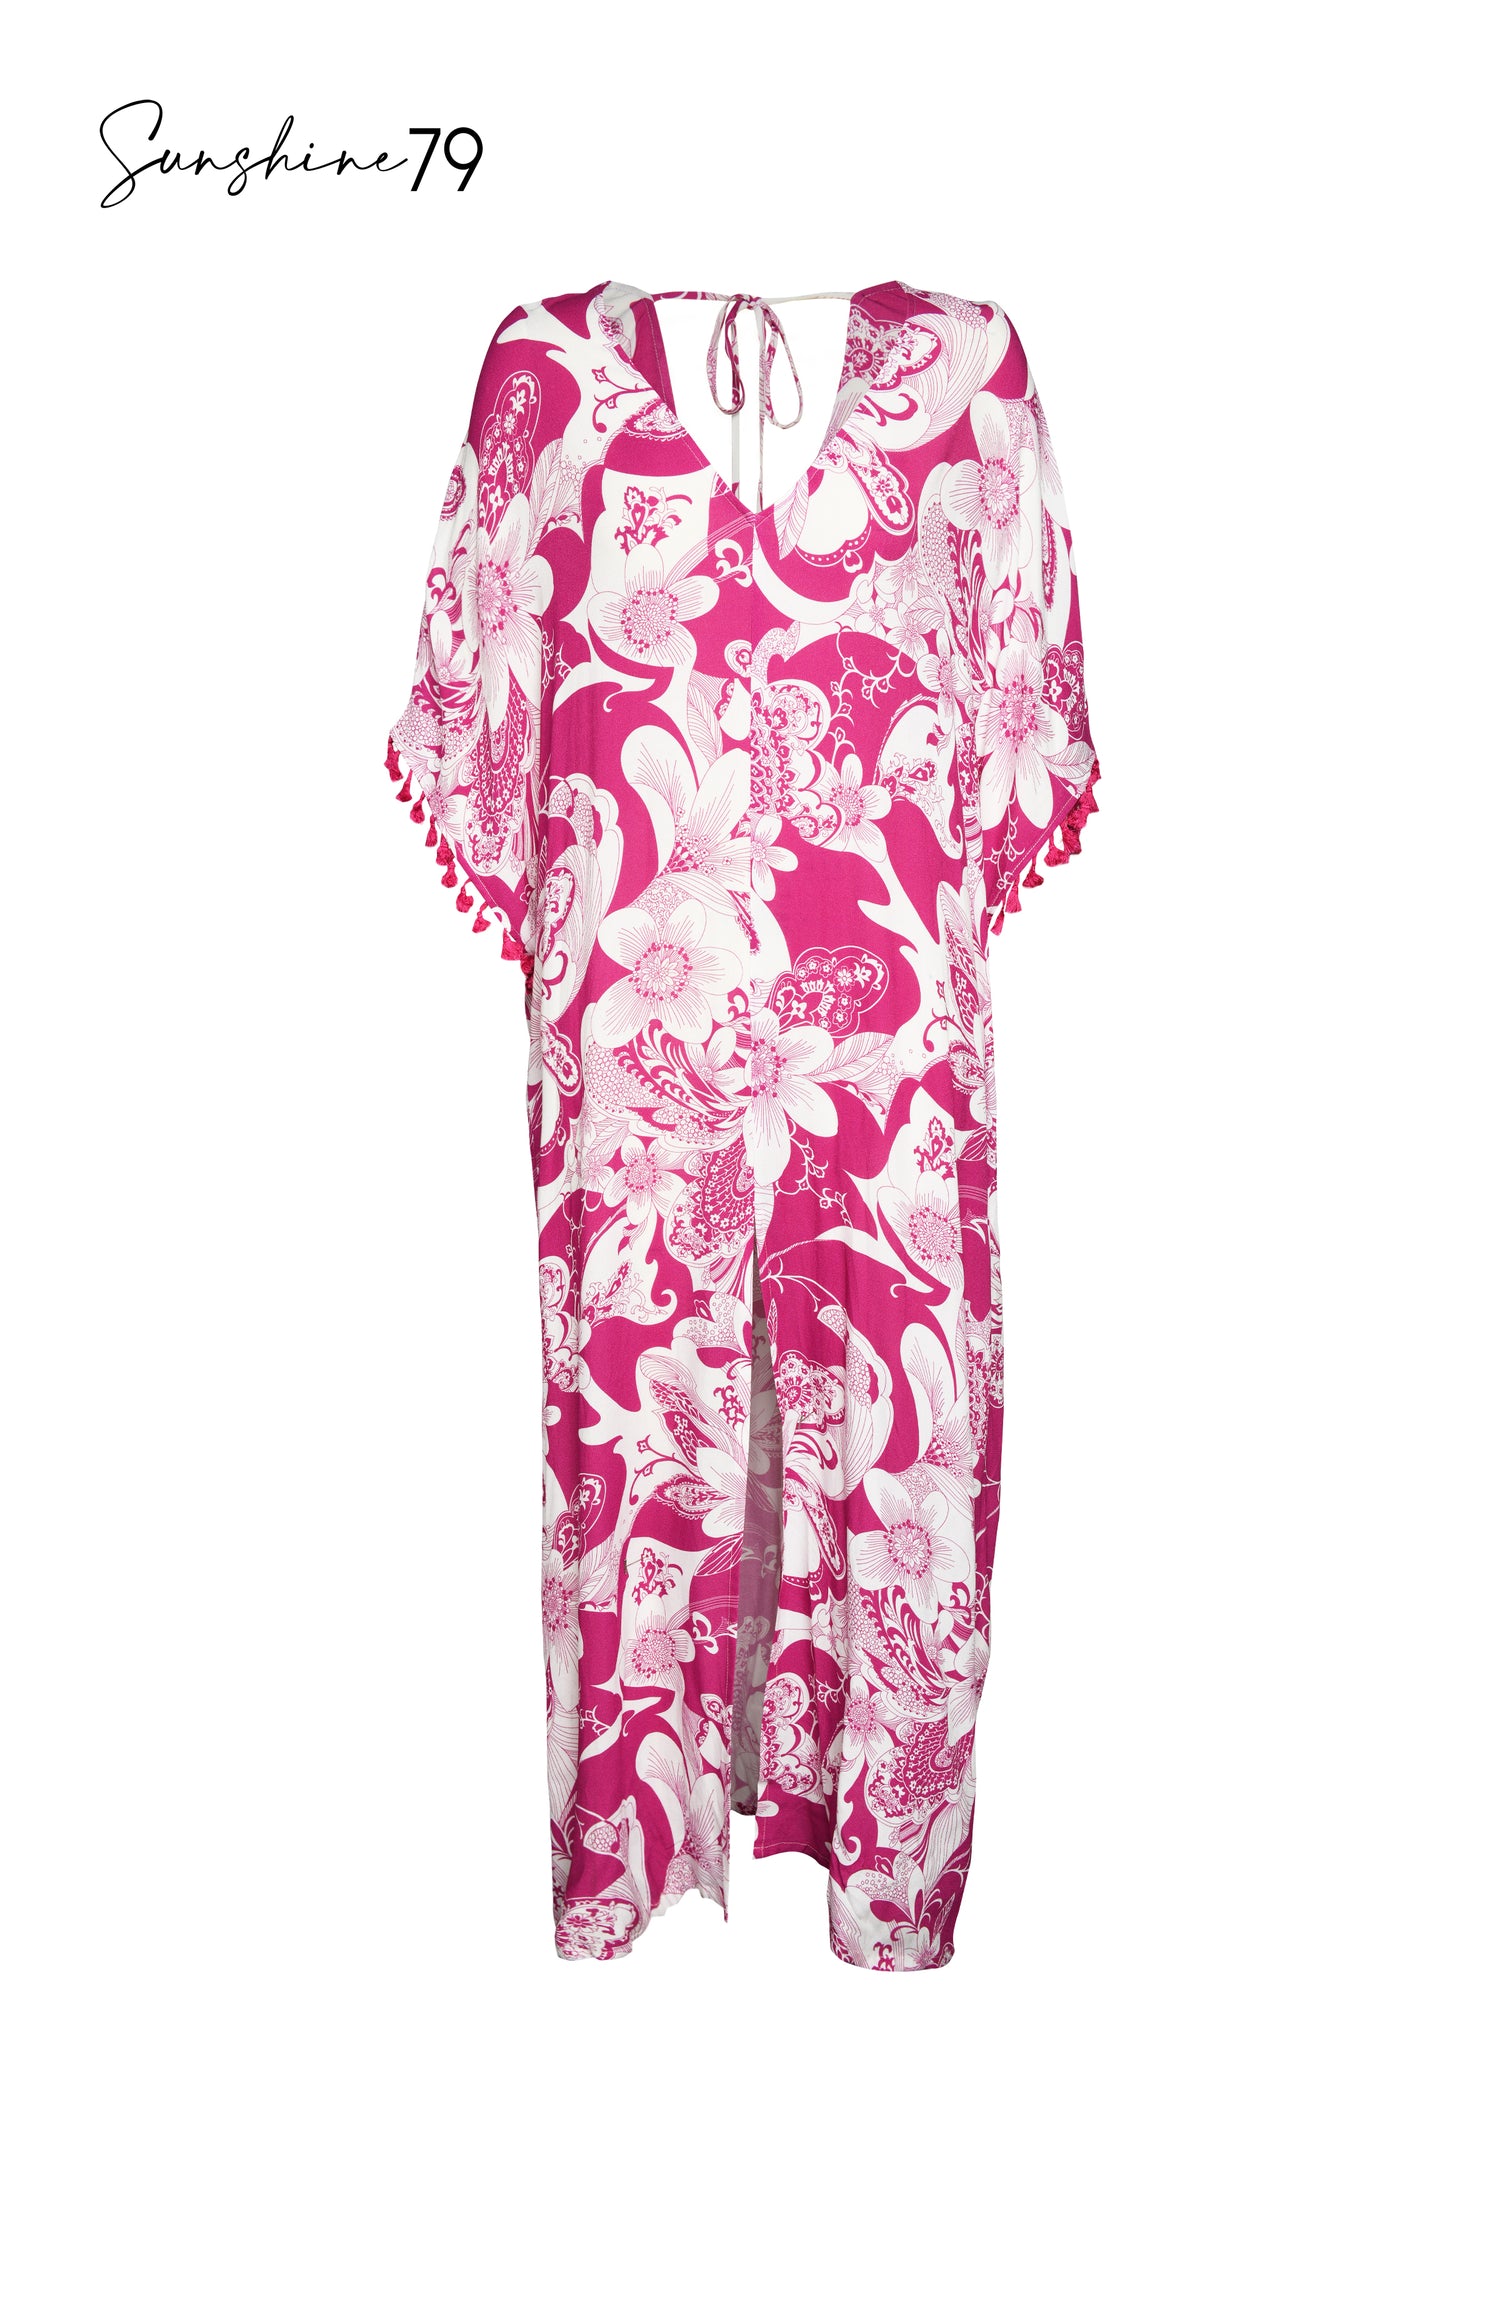 Model is wearing a fuchsia and white multicolored tropical printed maxi dress cover up from our Sunshine 79 brand.